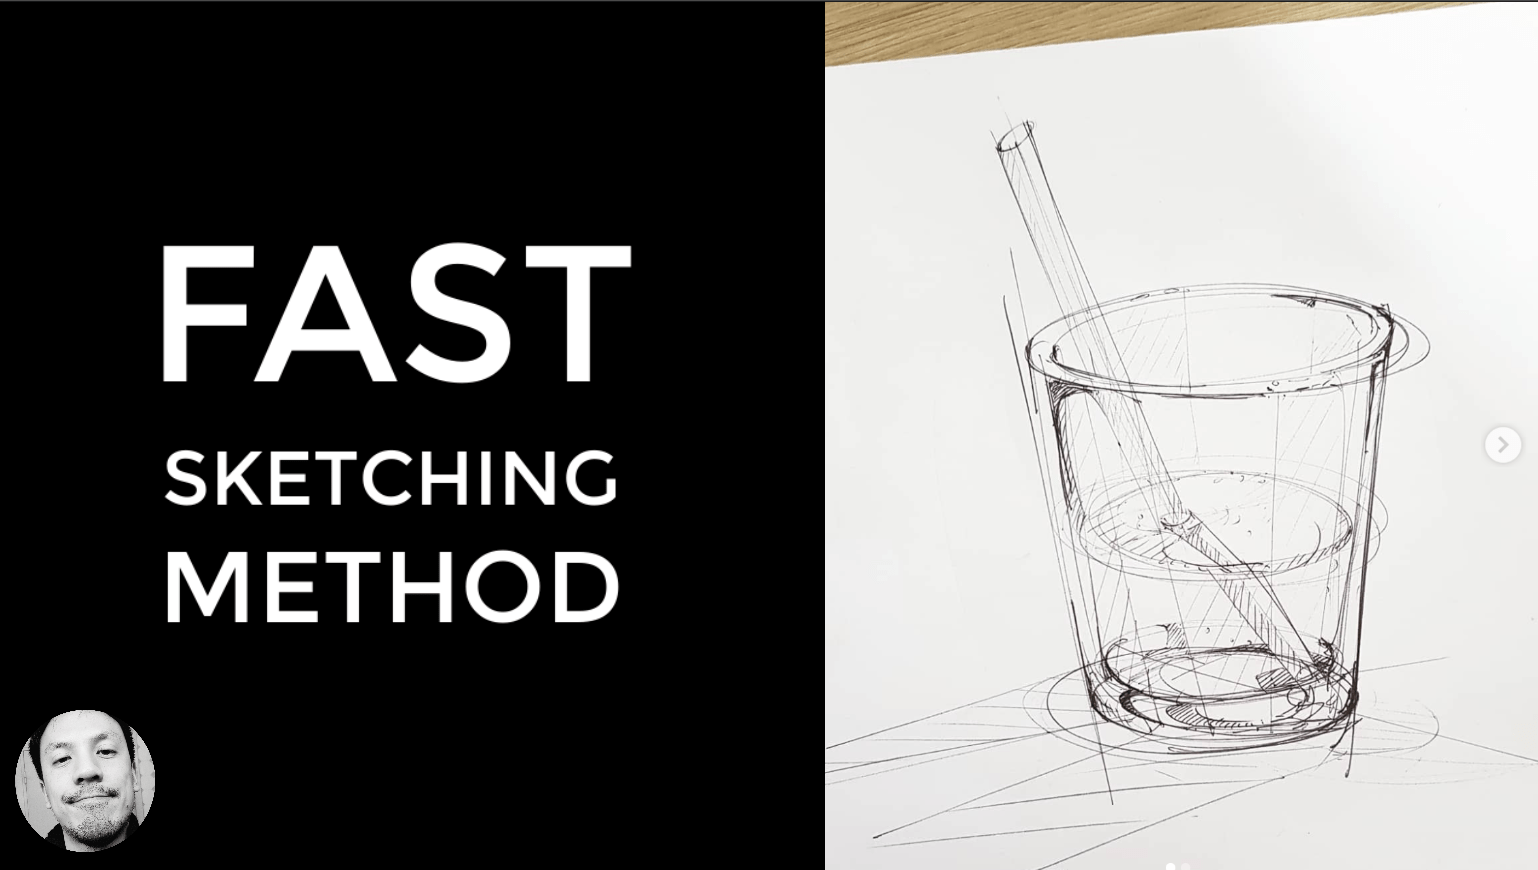 fast sketchinng method sketch the design sketchbook drawing hatching and rise your speed of sketching the design sketchbook chou tac chung a